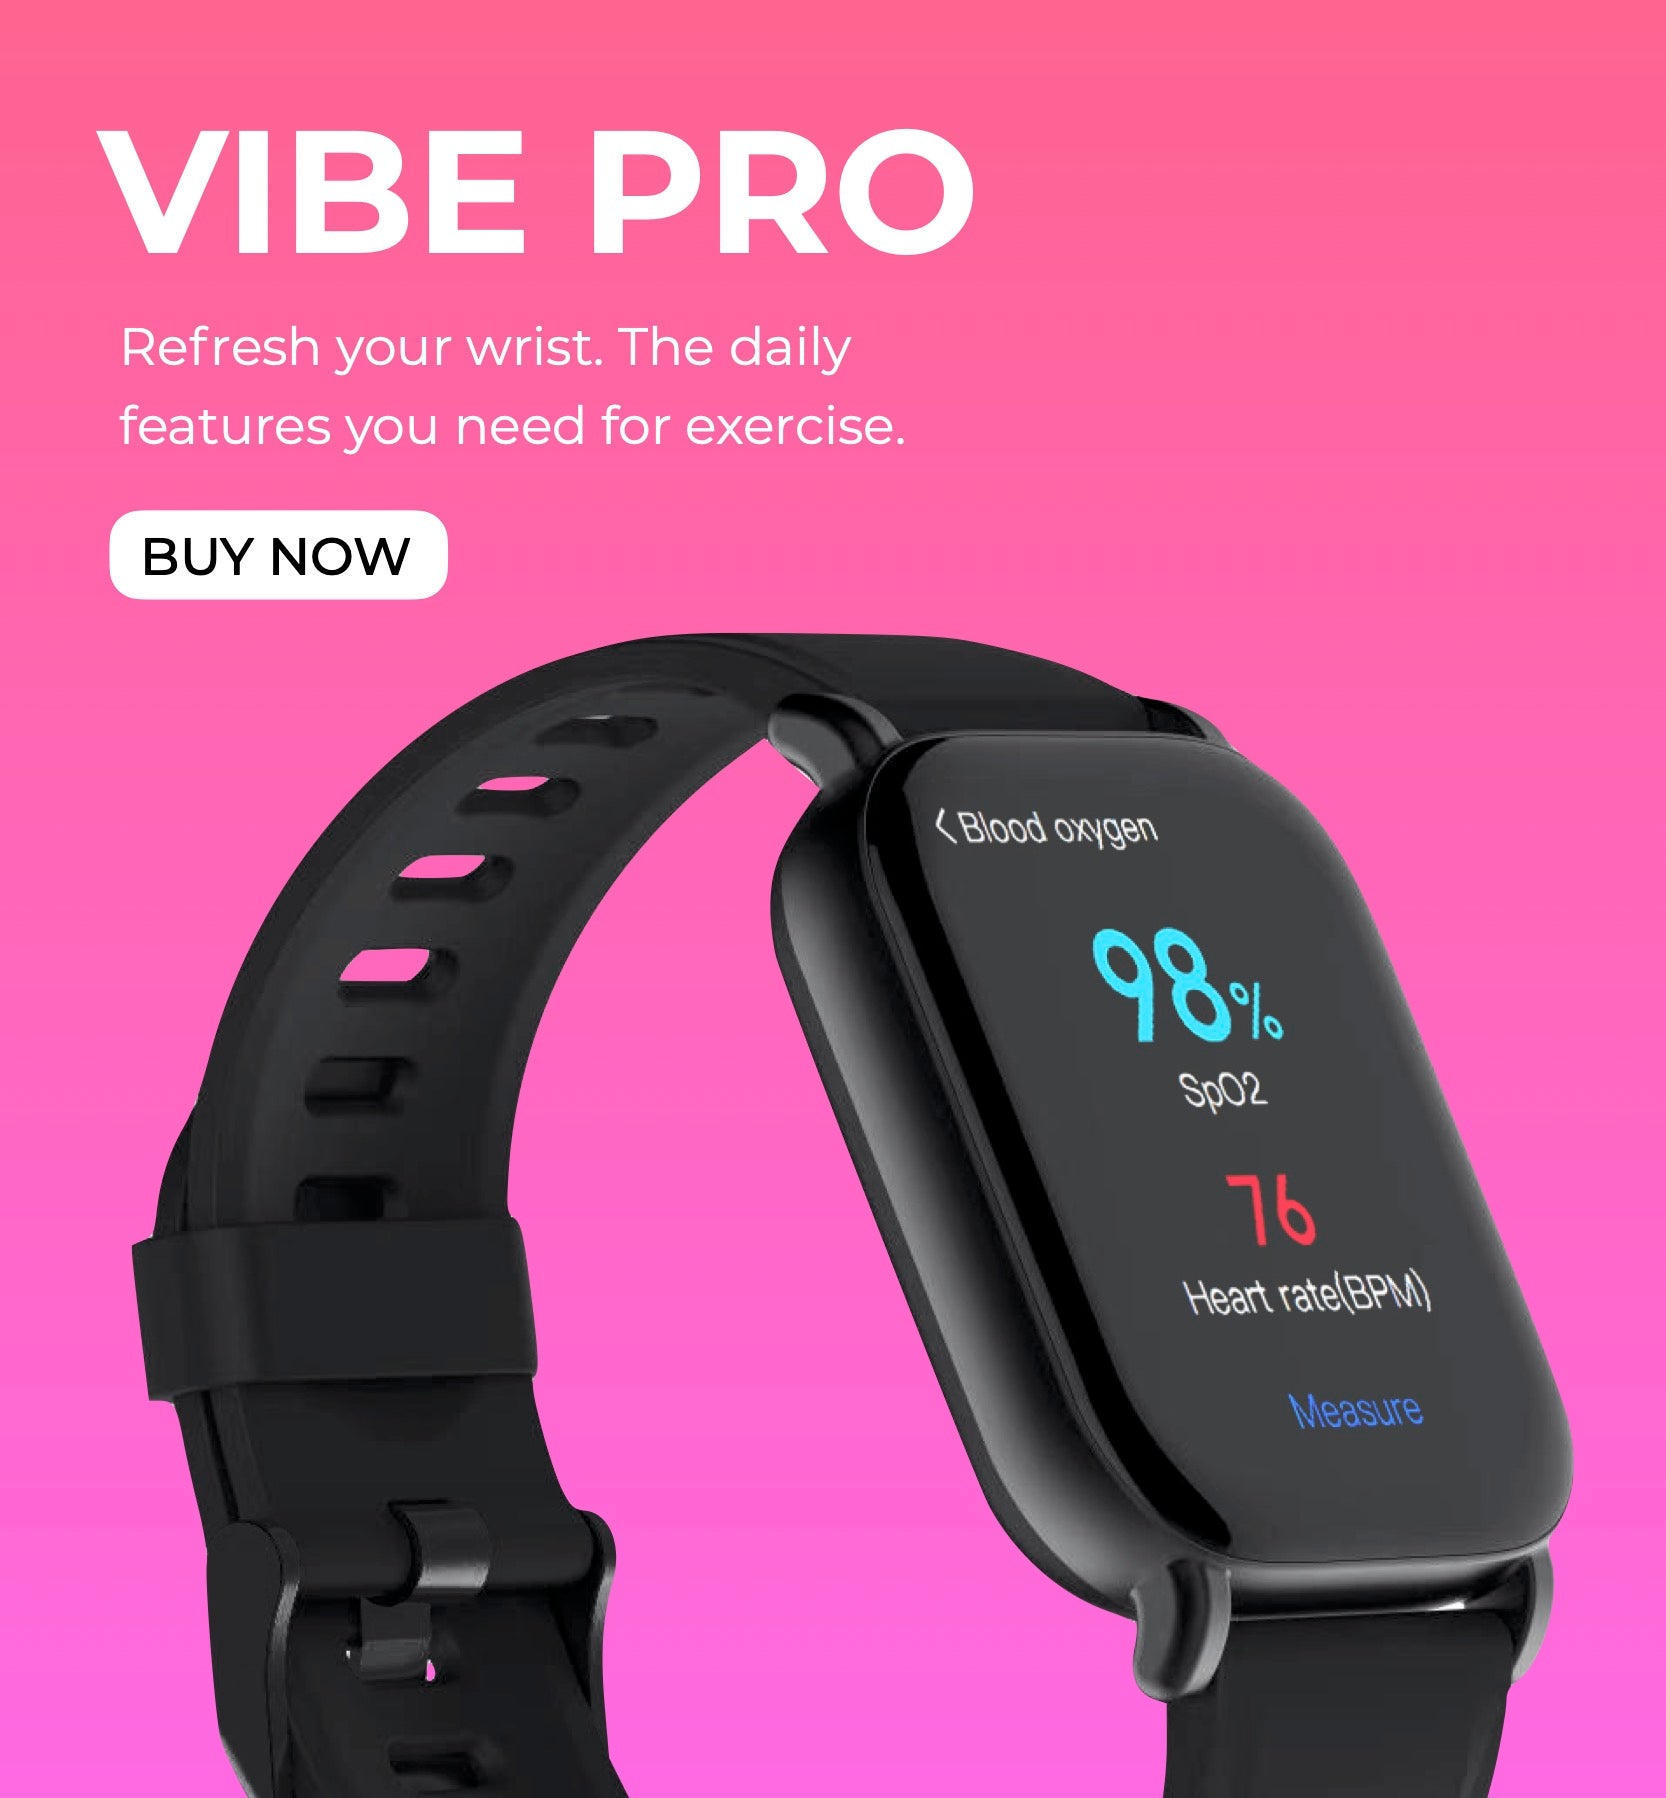 2 Hello 3 Plus watches for 89.99